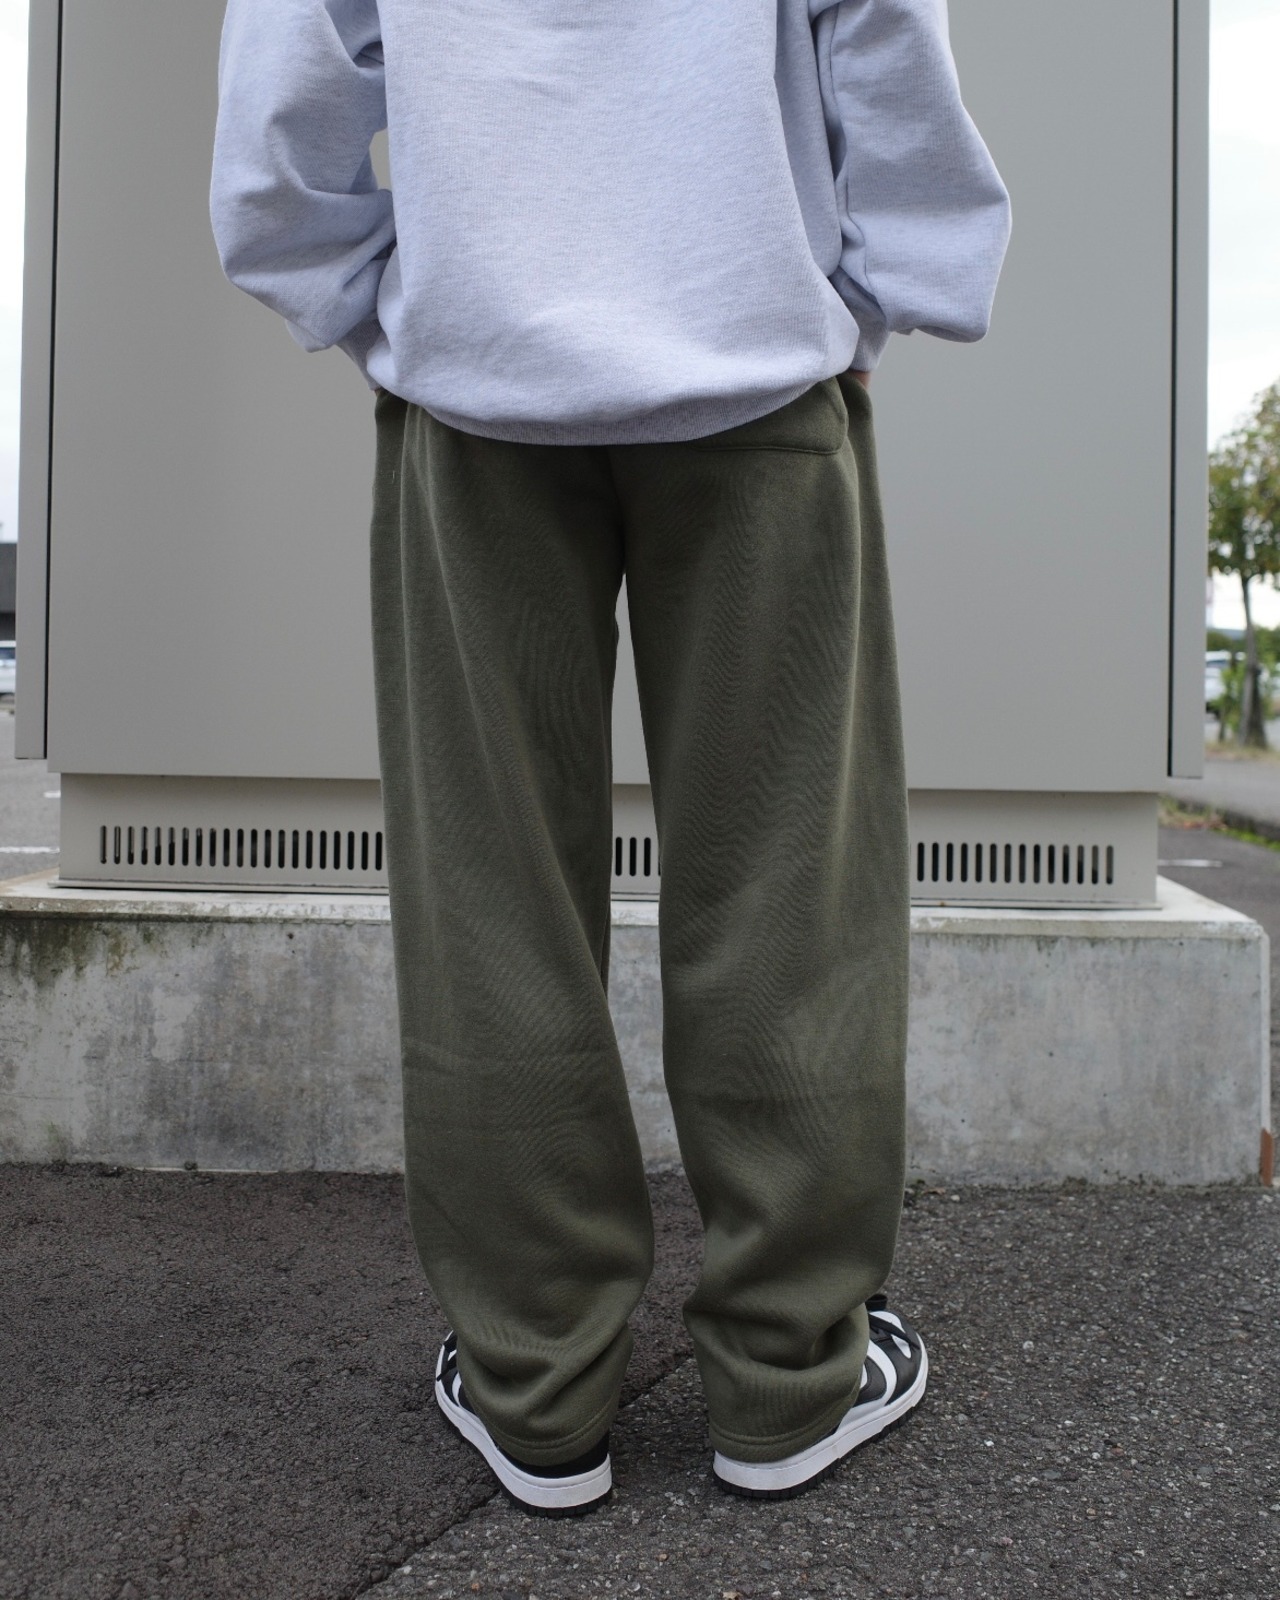 【SILAS】SILAS SWT CHEF PANTS【サイラス】